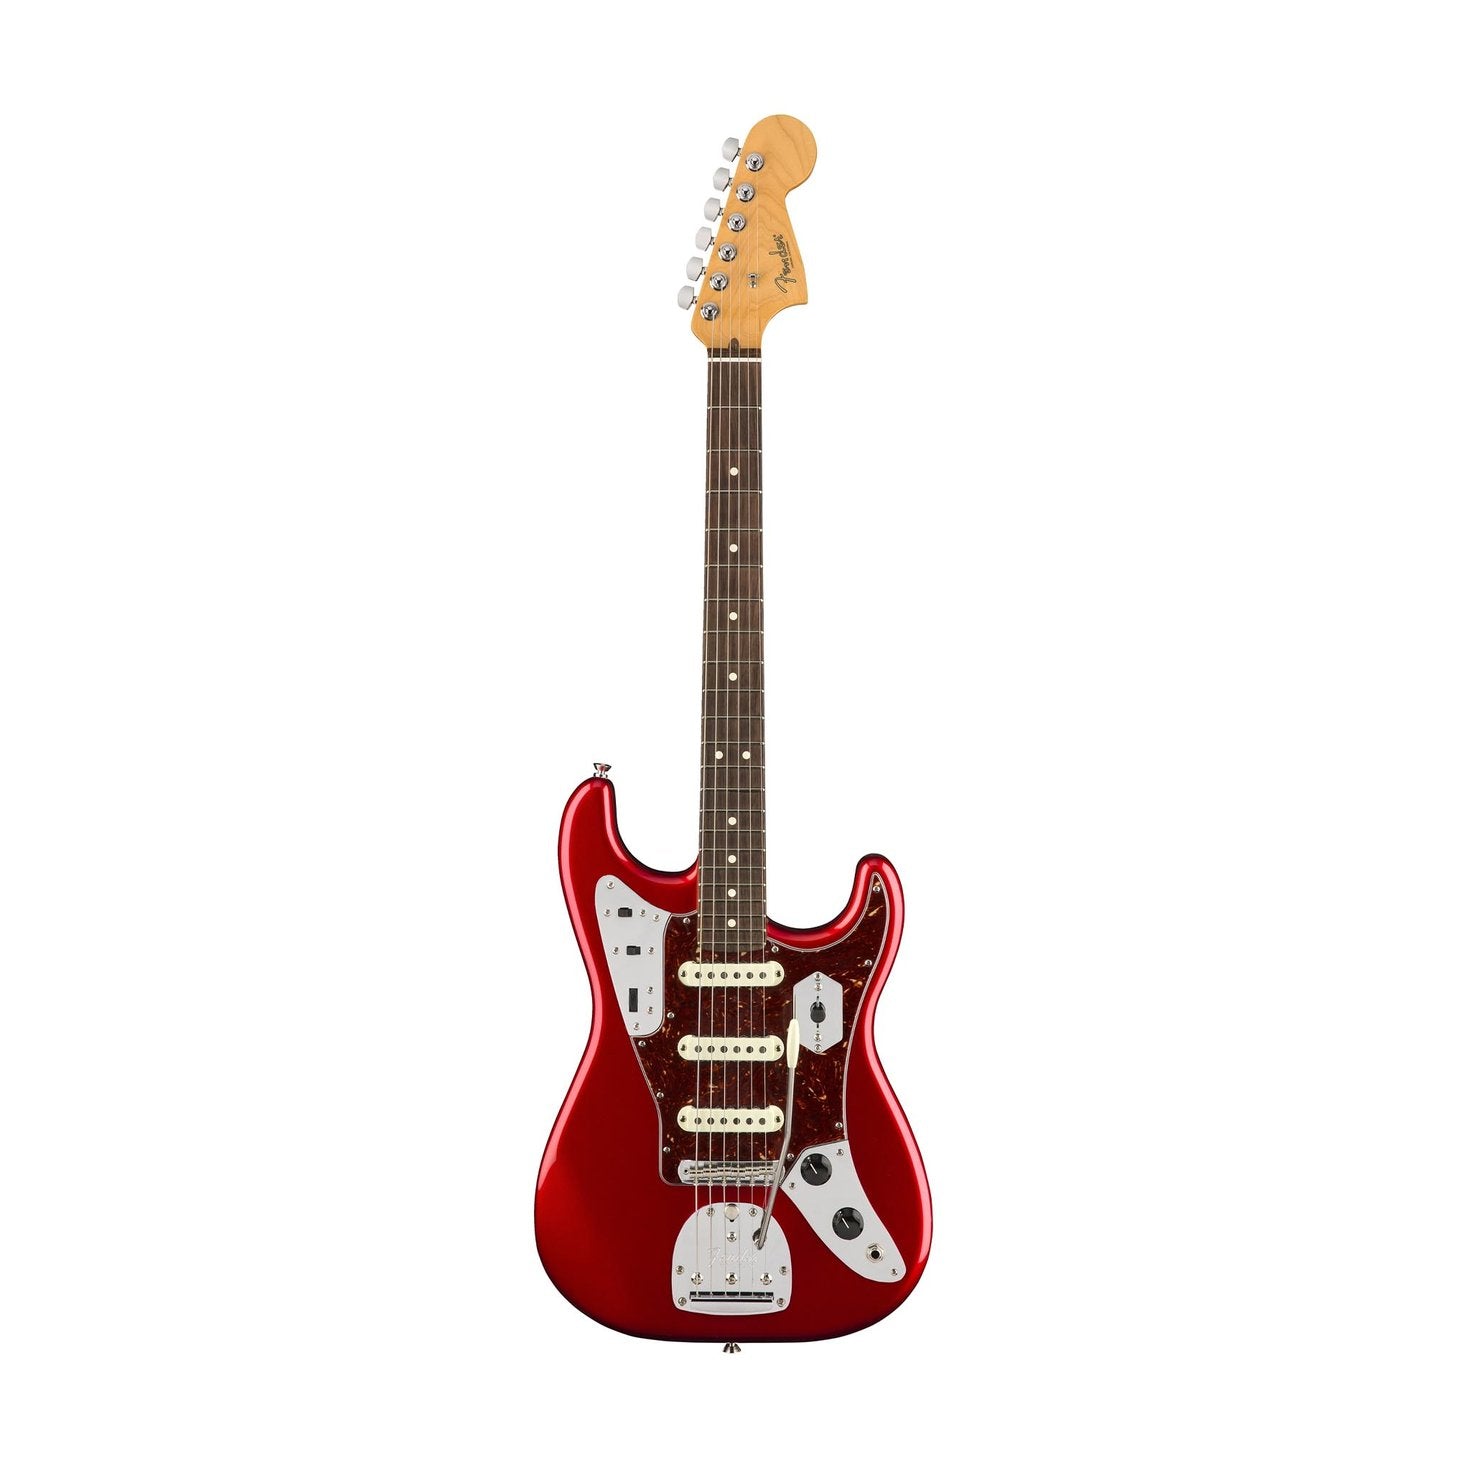 Fender Ltd Ed Parallel Universe Jaguar Stratocaster Electric Guitar, Rosewood Fb, Candy Apple Red, FENDER, ELECTRIC GUITAR, fender-electric-guitar-f03-017-6070-709, ZOSO MUSIC SDN BHD